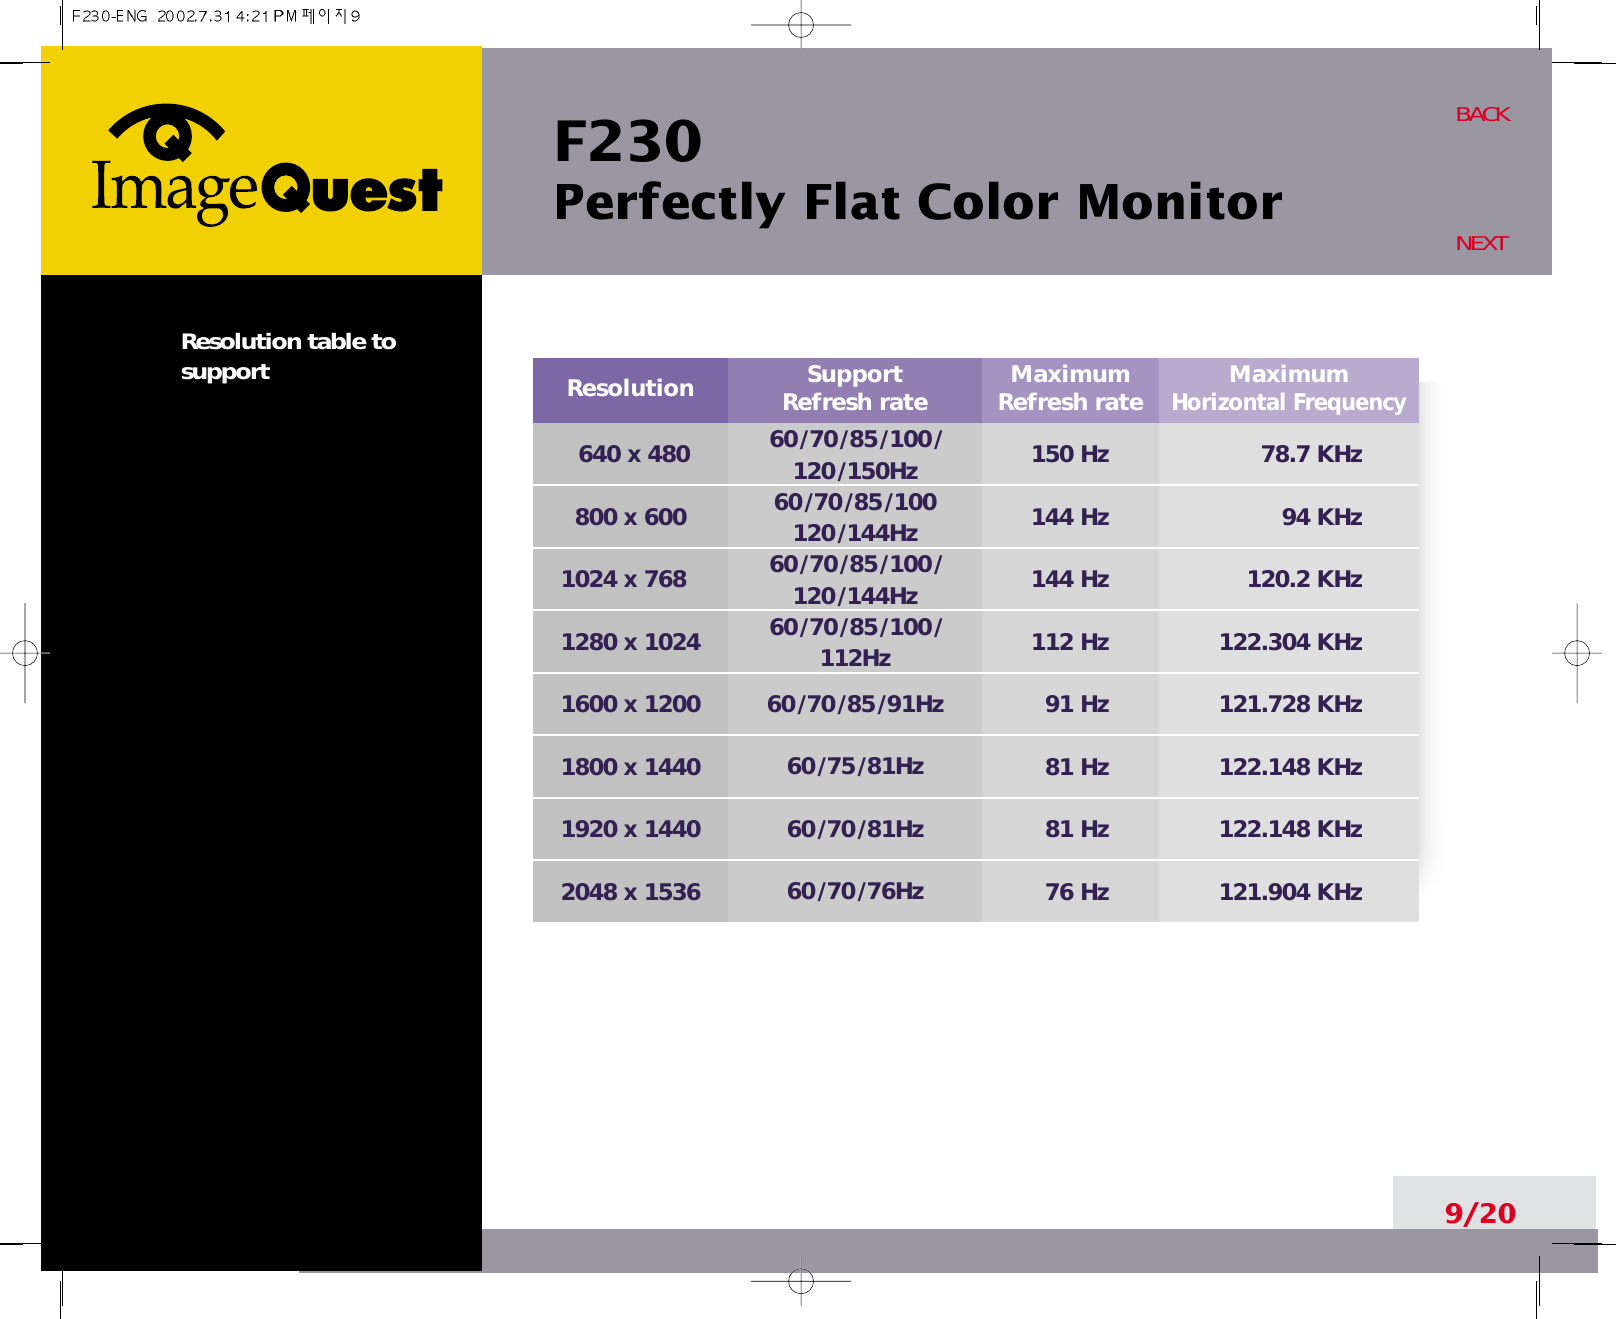 F230 Perfectly Flat Color MonitorResolution table tosupport9/20BACKNEXTMaximumRefresh rate MaximumHorizontal FrequencyResolution SupportRefresh rate150 Hz144 Hz144 Hz112 Hz91 Hz81 Hz81 Hz76 Hz78.7 KHz94 KHz120.2 KHz122.304 KHz121.728 KHz122.148 KHz122.148 KHz121.904 KHz640 x 480800 x 6001024 x 7681280 x 10241600 x 12001800 x 14401920 x 14402048 x 153660/70/85/100/120/150Hz60/70/85/100120/144Hz60/70/85/100/120/144Hz60/70/85/100/112Hz60/70/85/91Hz60/75/81Hz60/70/81Hz60/70/76Hz